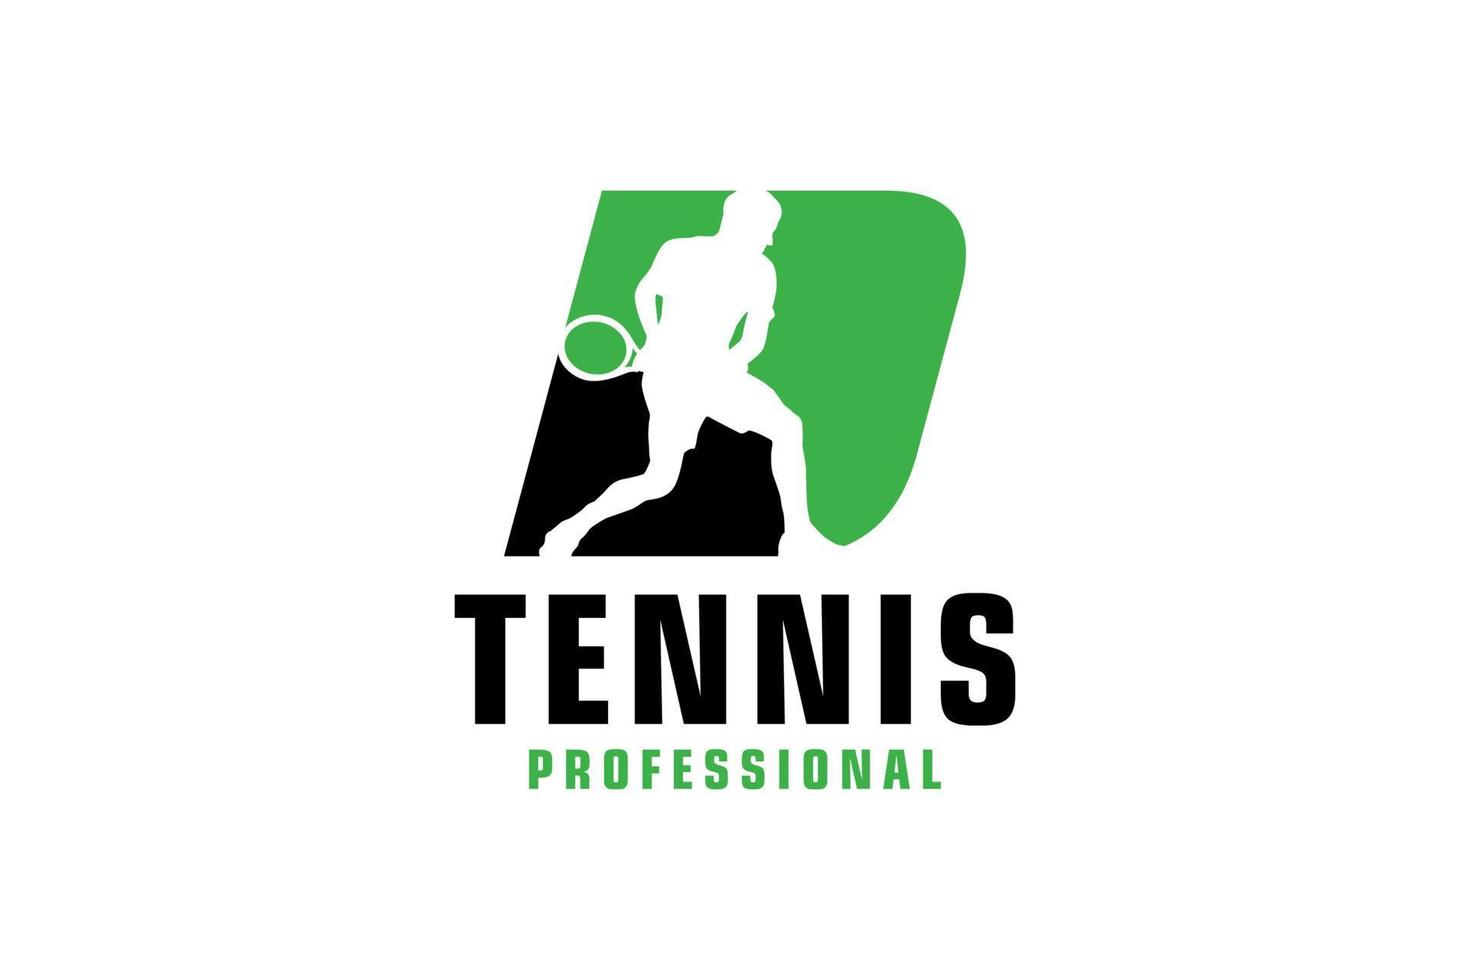 Letter D with Tennis player silhouette Logo Design. Vector Design Template Elements for Sport Team or Corporate Identity.